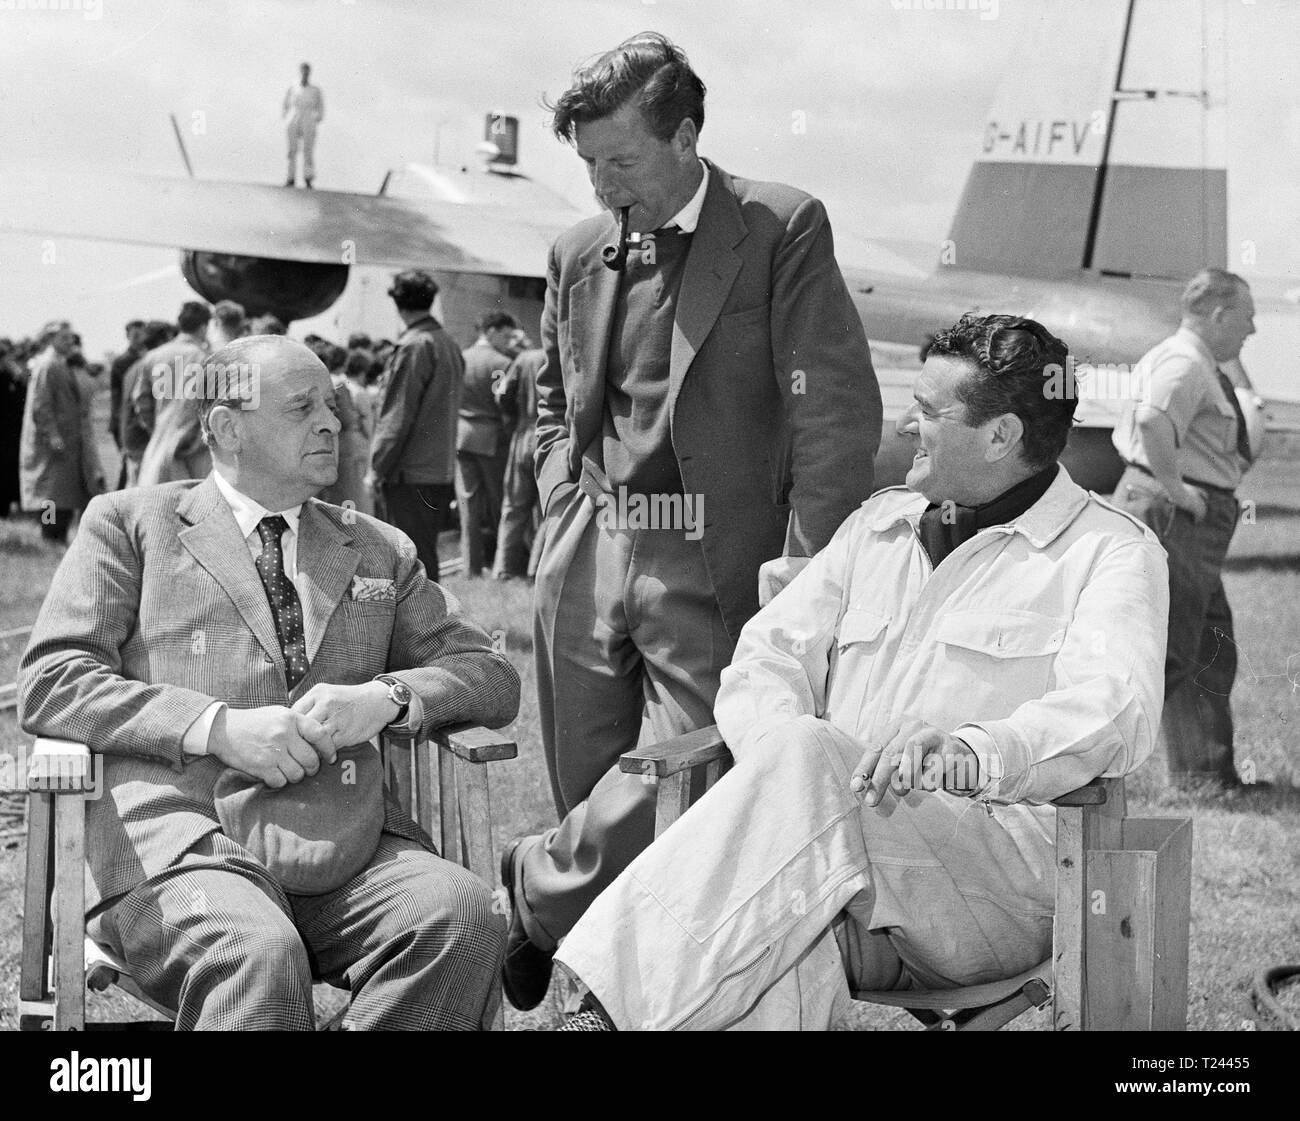 The Man in the Sky (1957) Walter Fitzgerald, Film Director Charles Crichton,  Jack Hawkins,     Date: 1957 Stock Photo